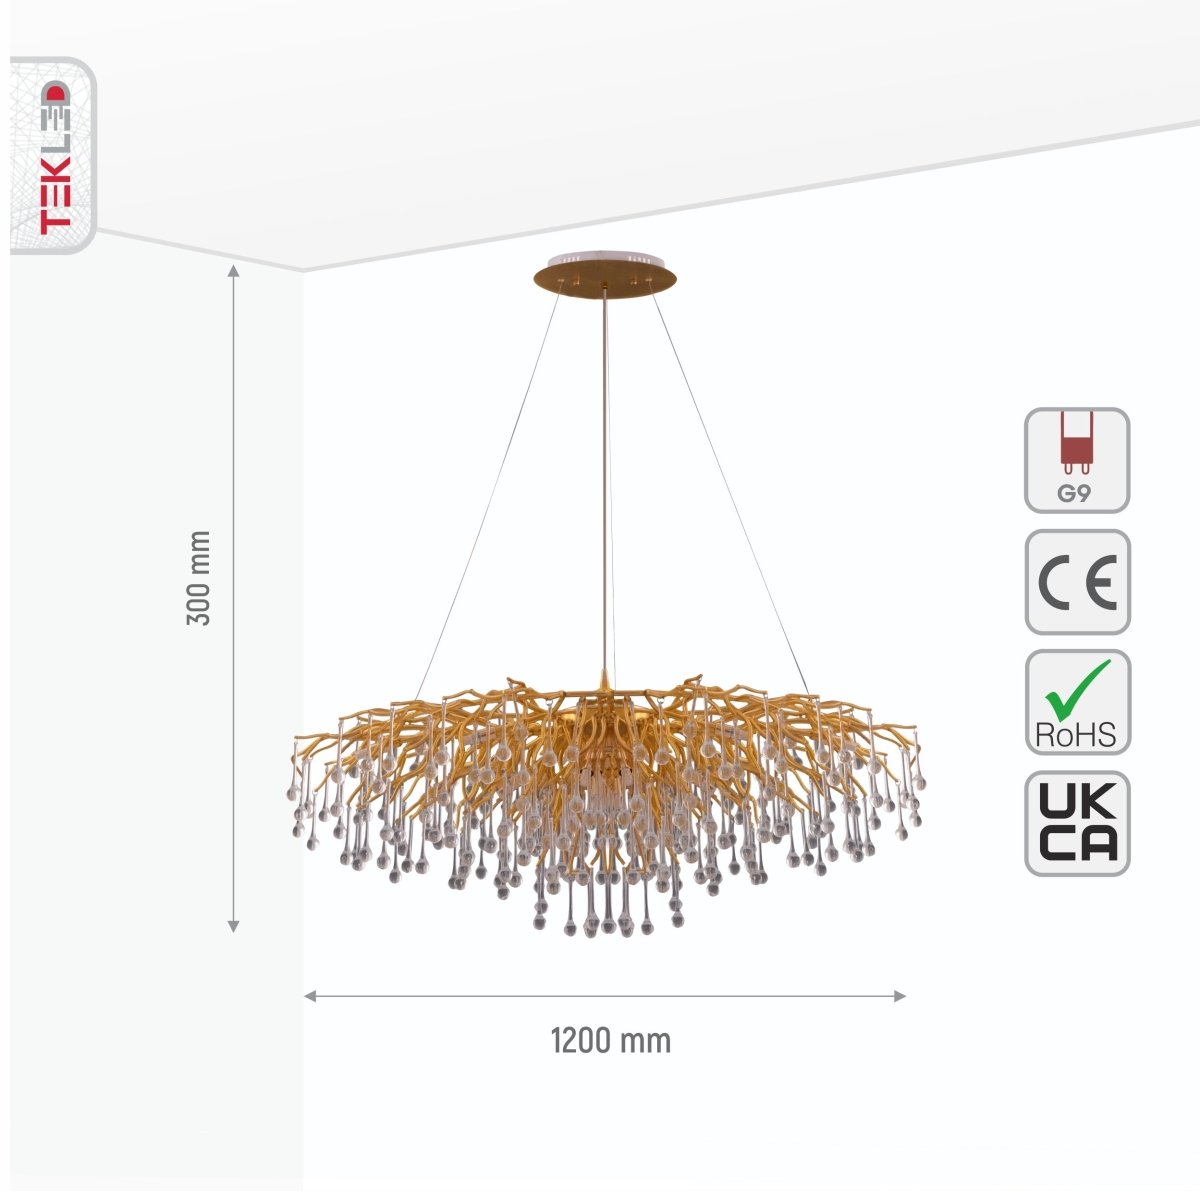 Size and specs of Modern Crystal Glass Droplet Chandelier with 13xG9 Fittings 1200mm | TEKLED 159-17530